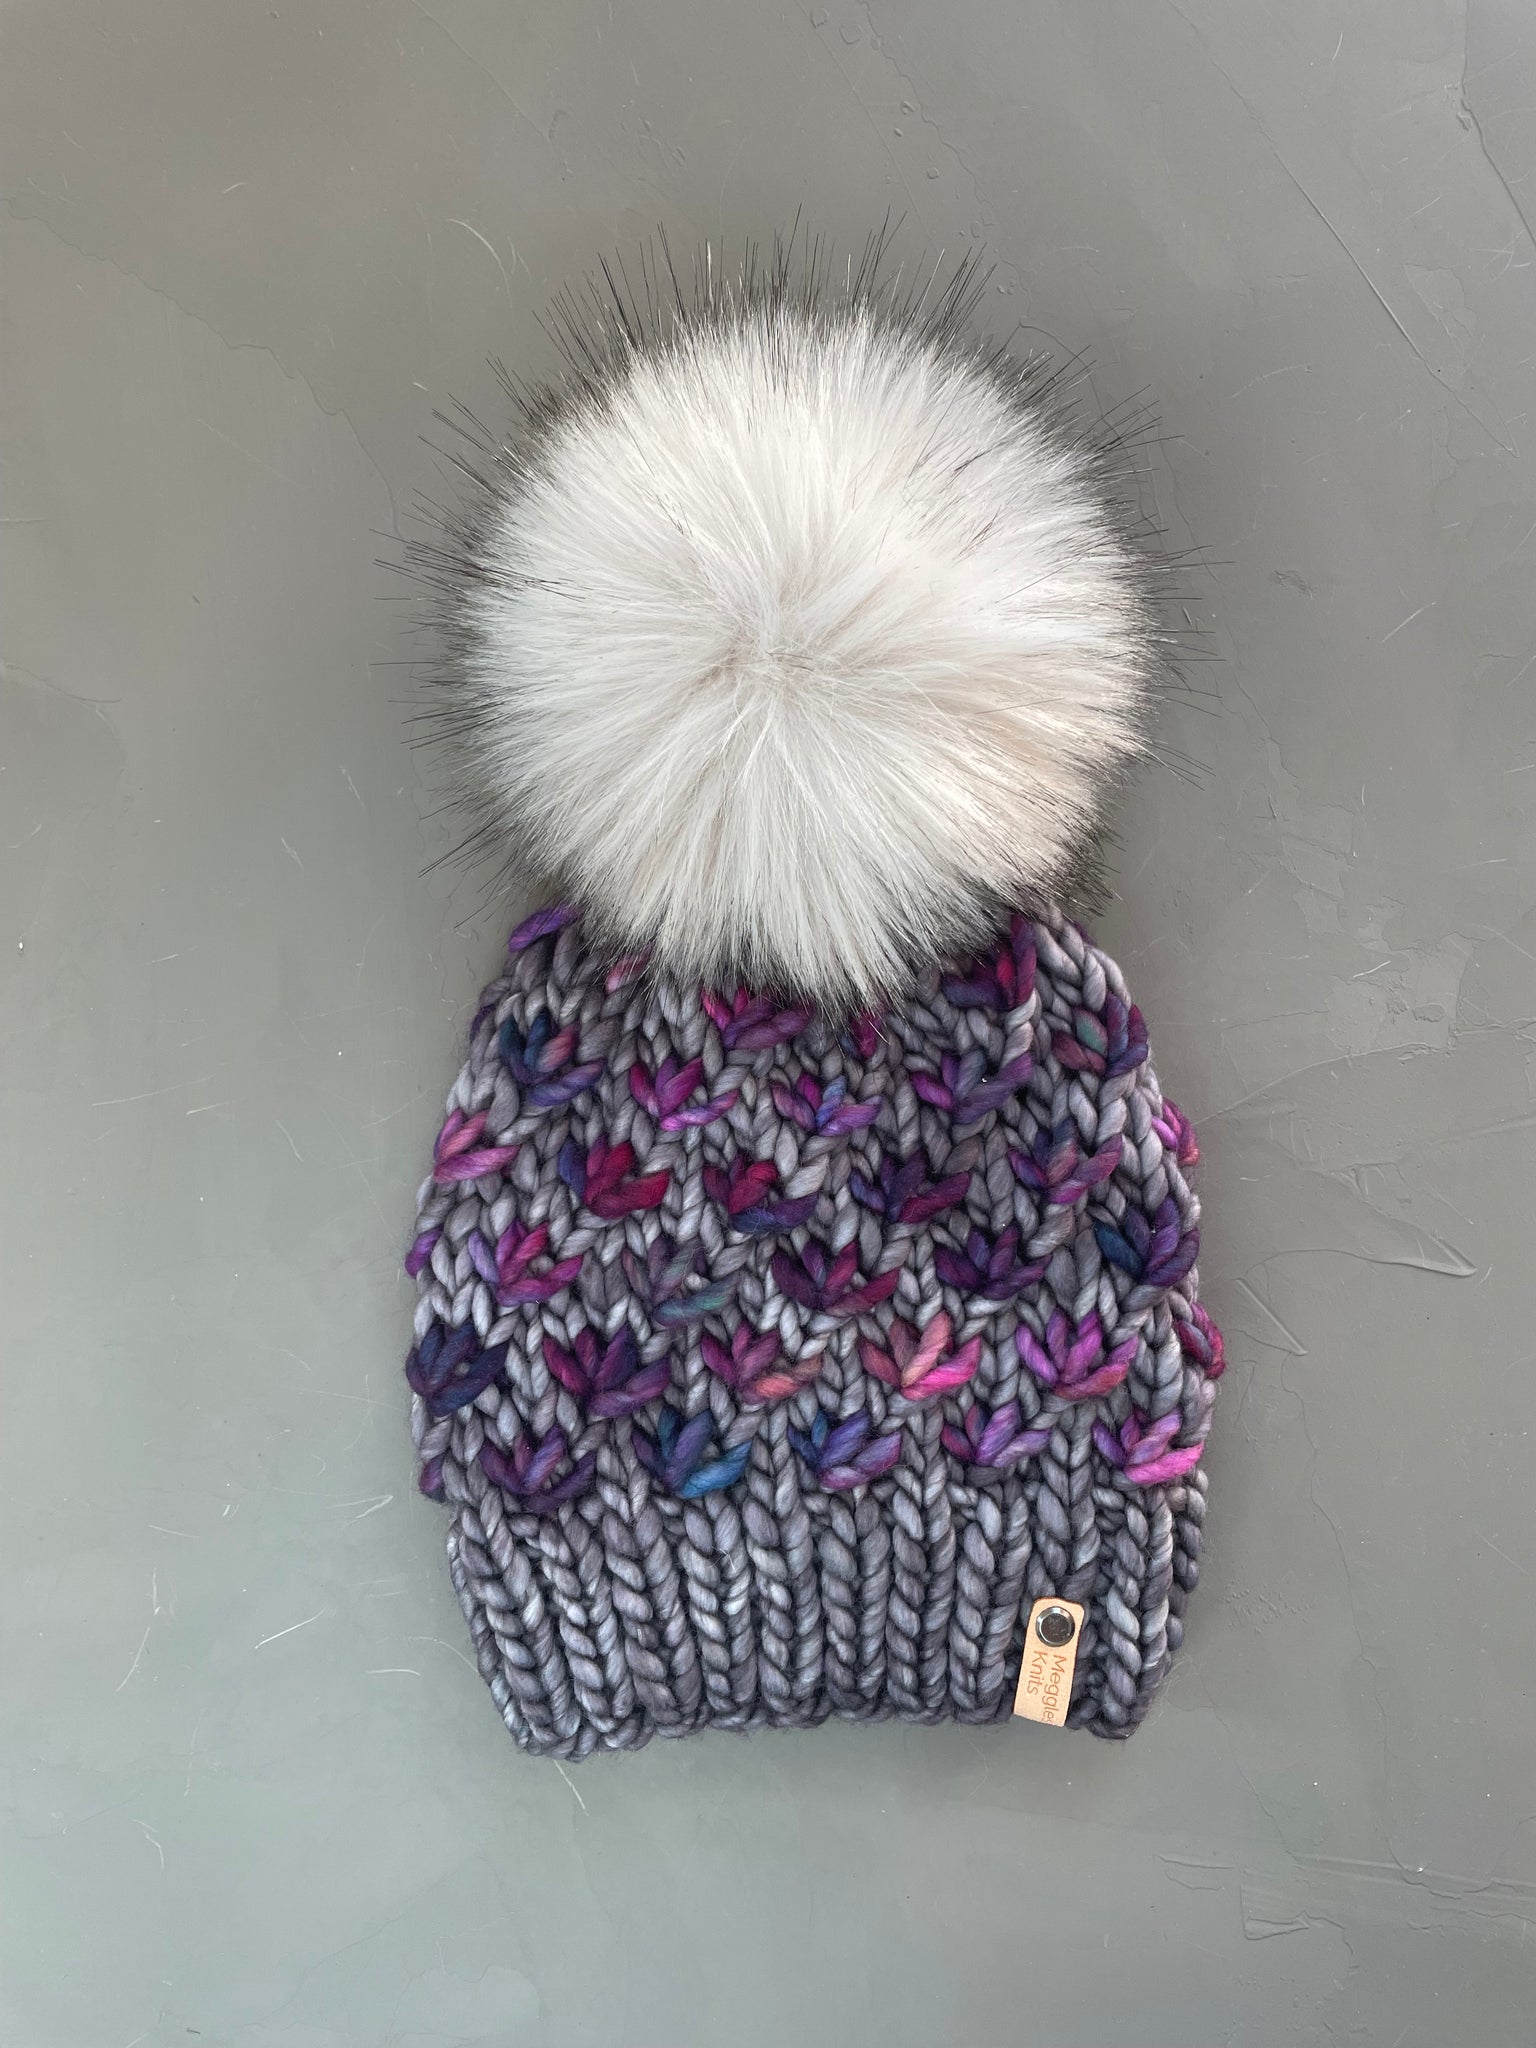 Lotus Flower Beanie in Plomo and Boreal